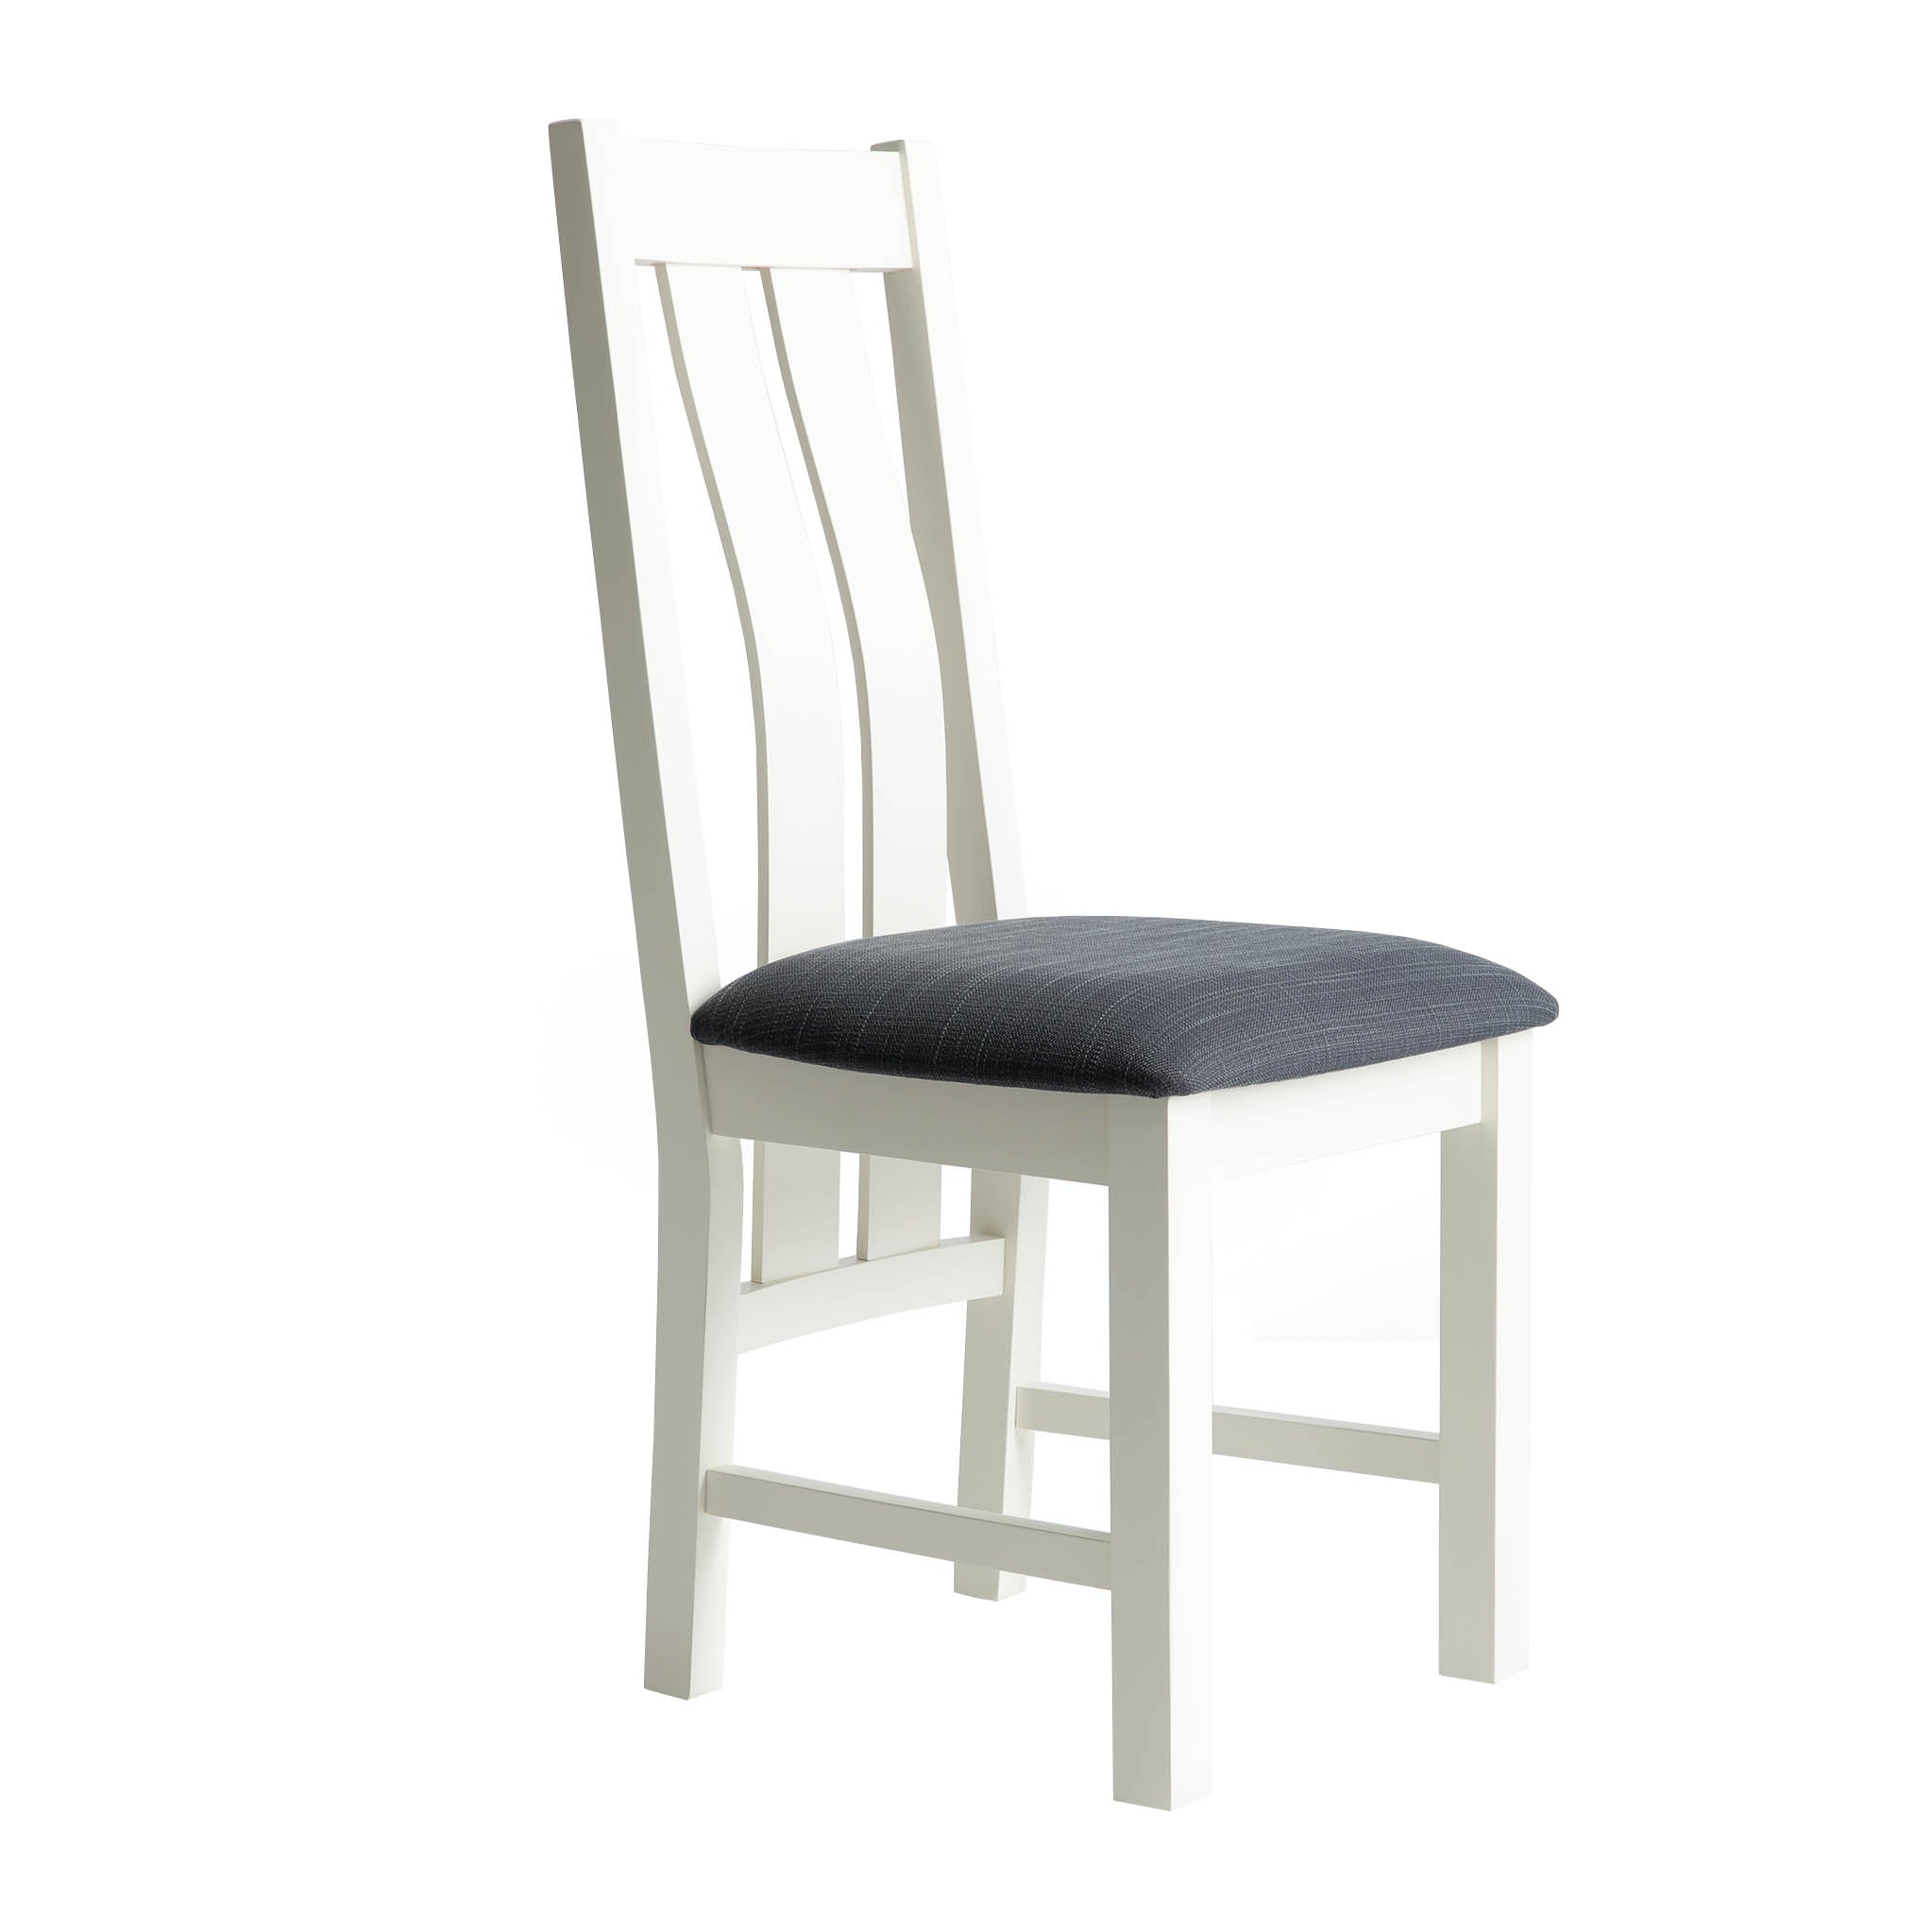 Padstow White Solid Wooden Dining Chair With Hard Wearing Seat Pad